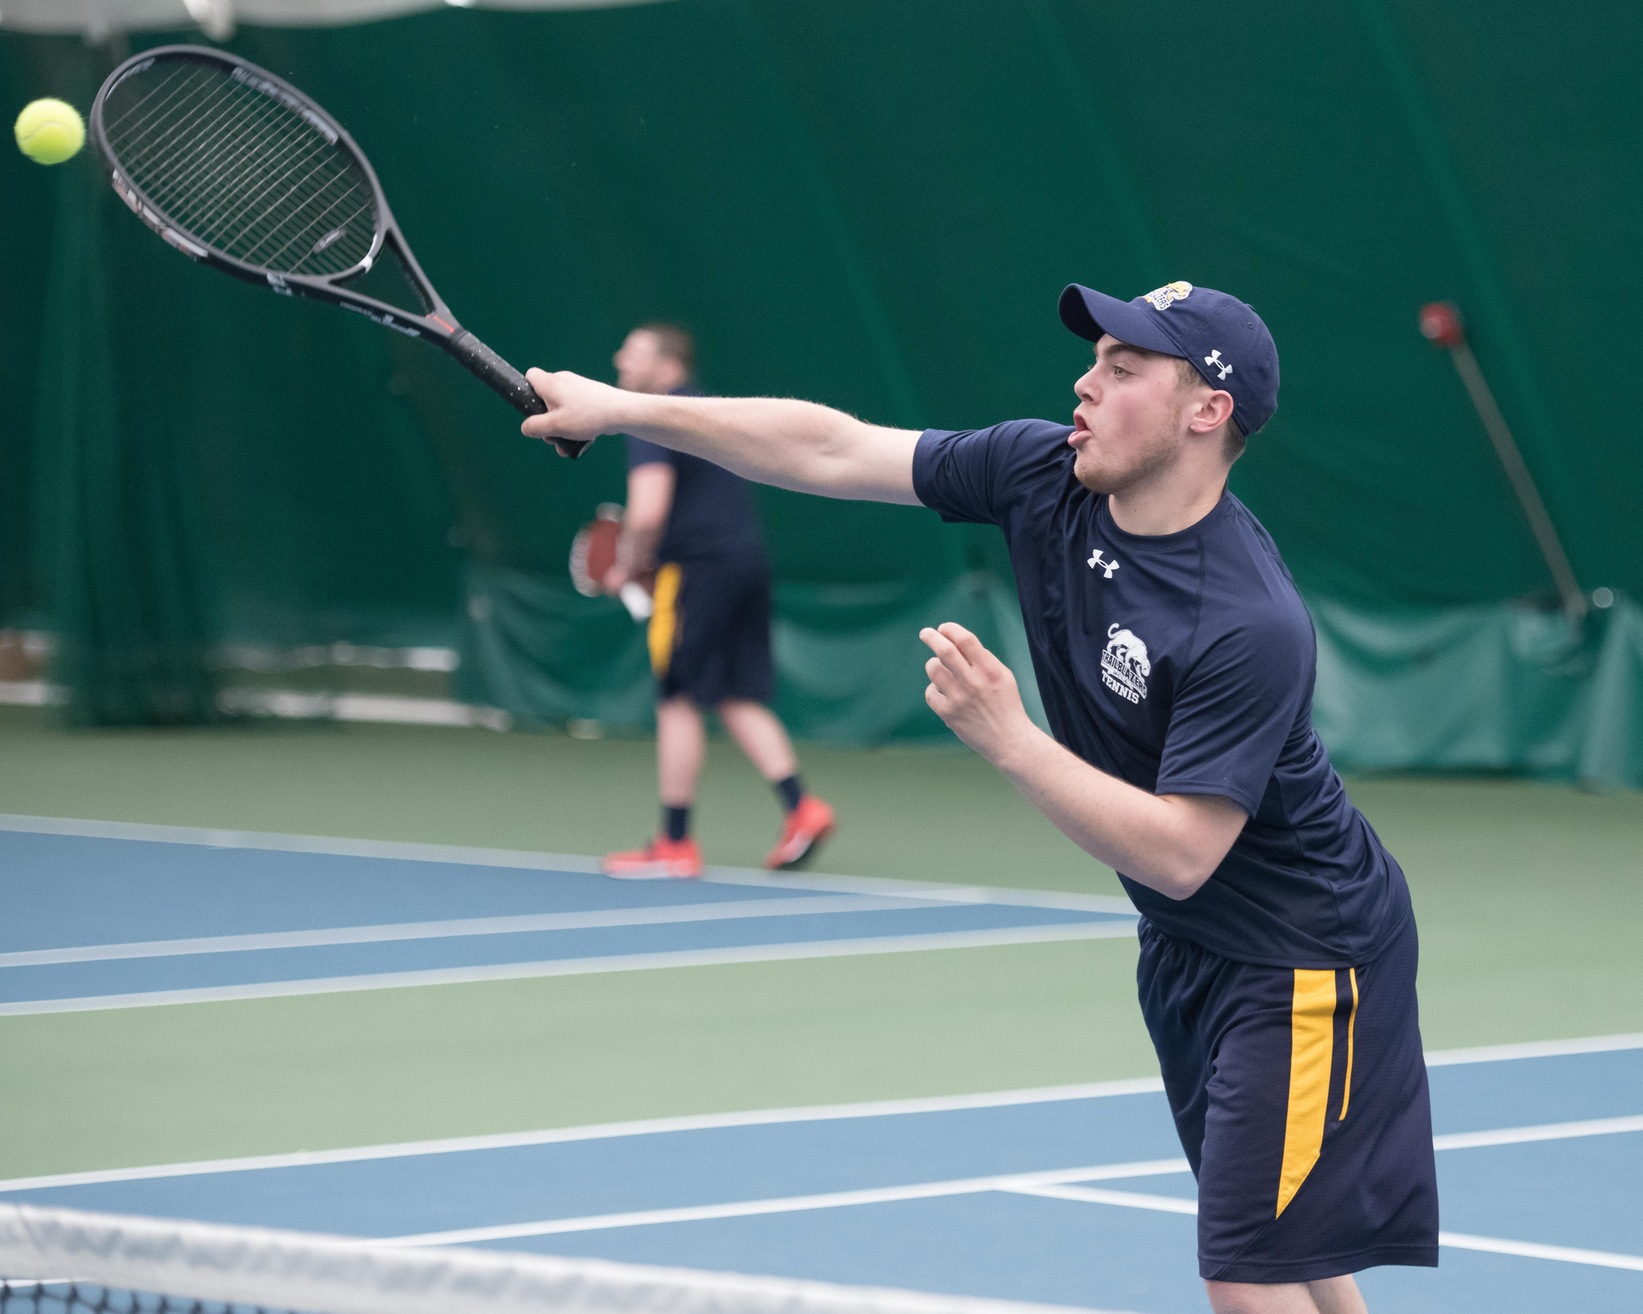 Tennis earns first win of 2018 with 8-1 victory over NAC foe Lyndon State